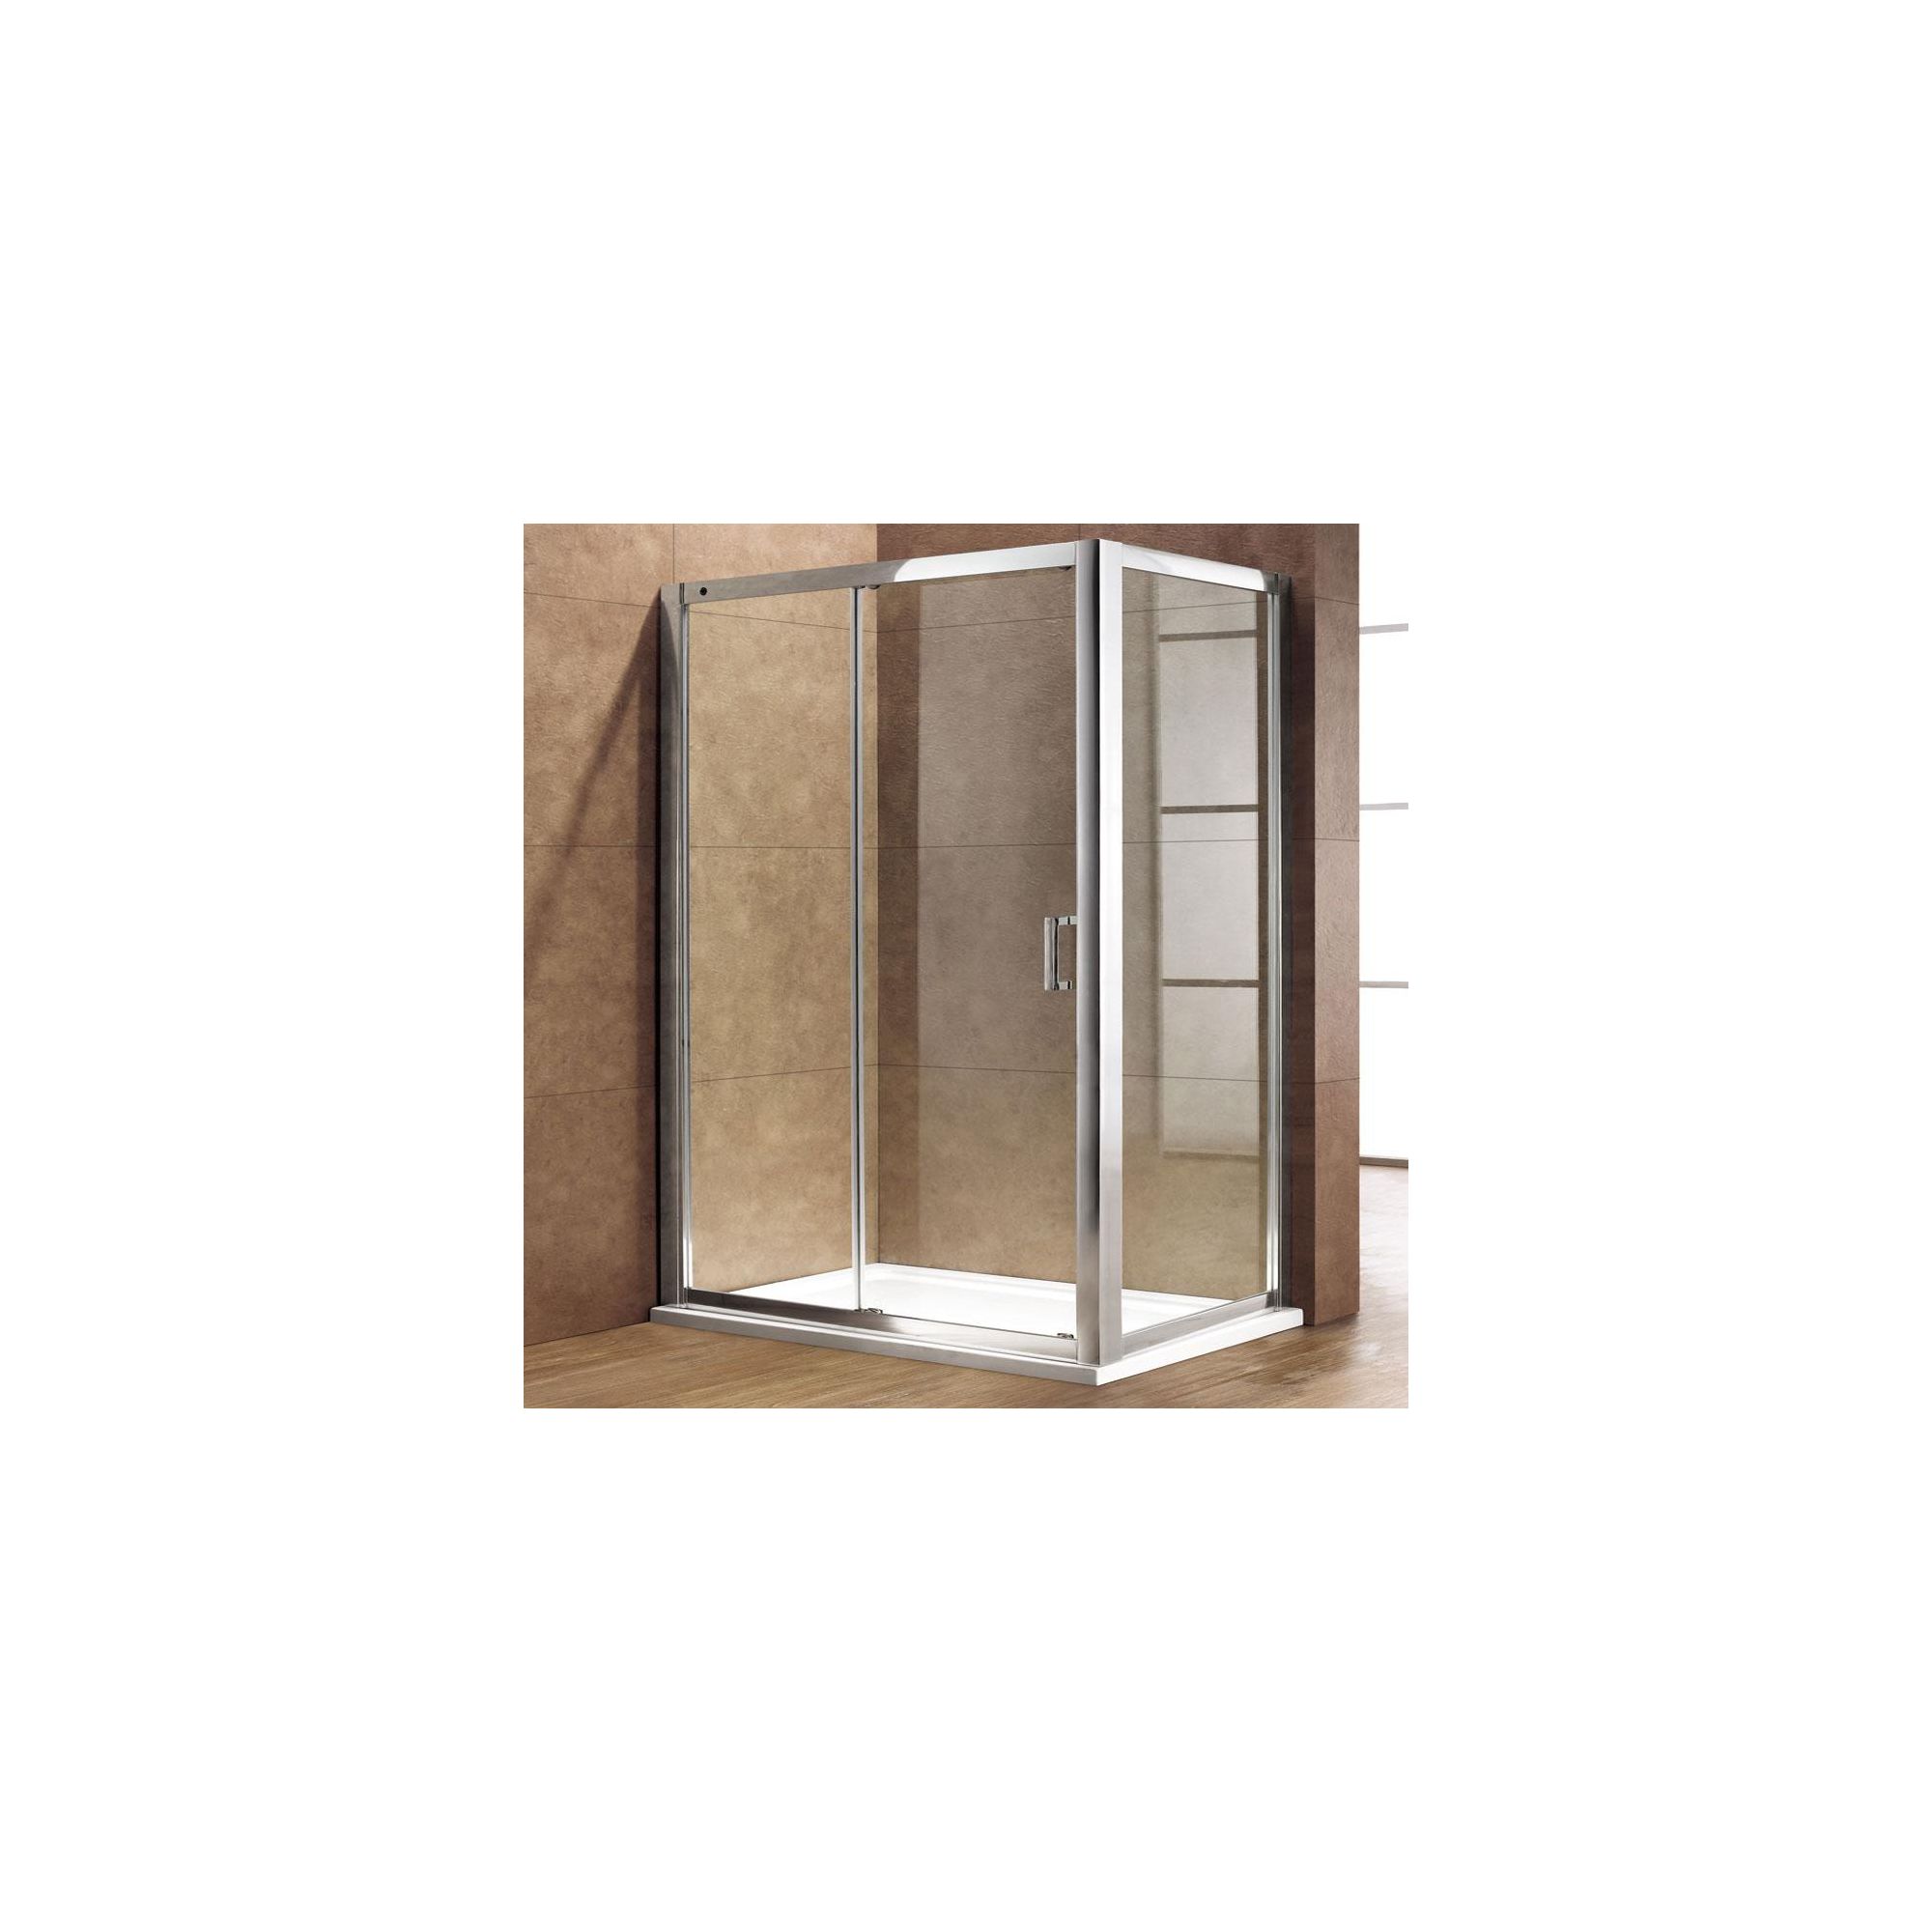 Duchy Premium Single Sliding Door Shower Enclosure, 1400mm x 900mm, 8mm Glass, Low Profile Tray at Tesco Direct